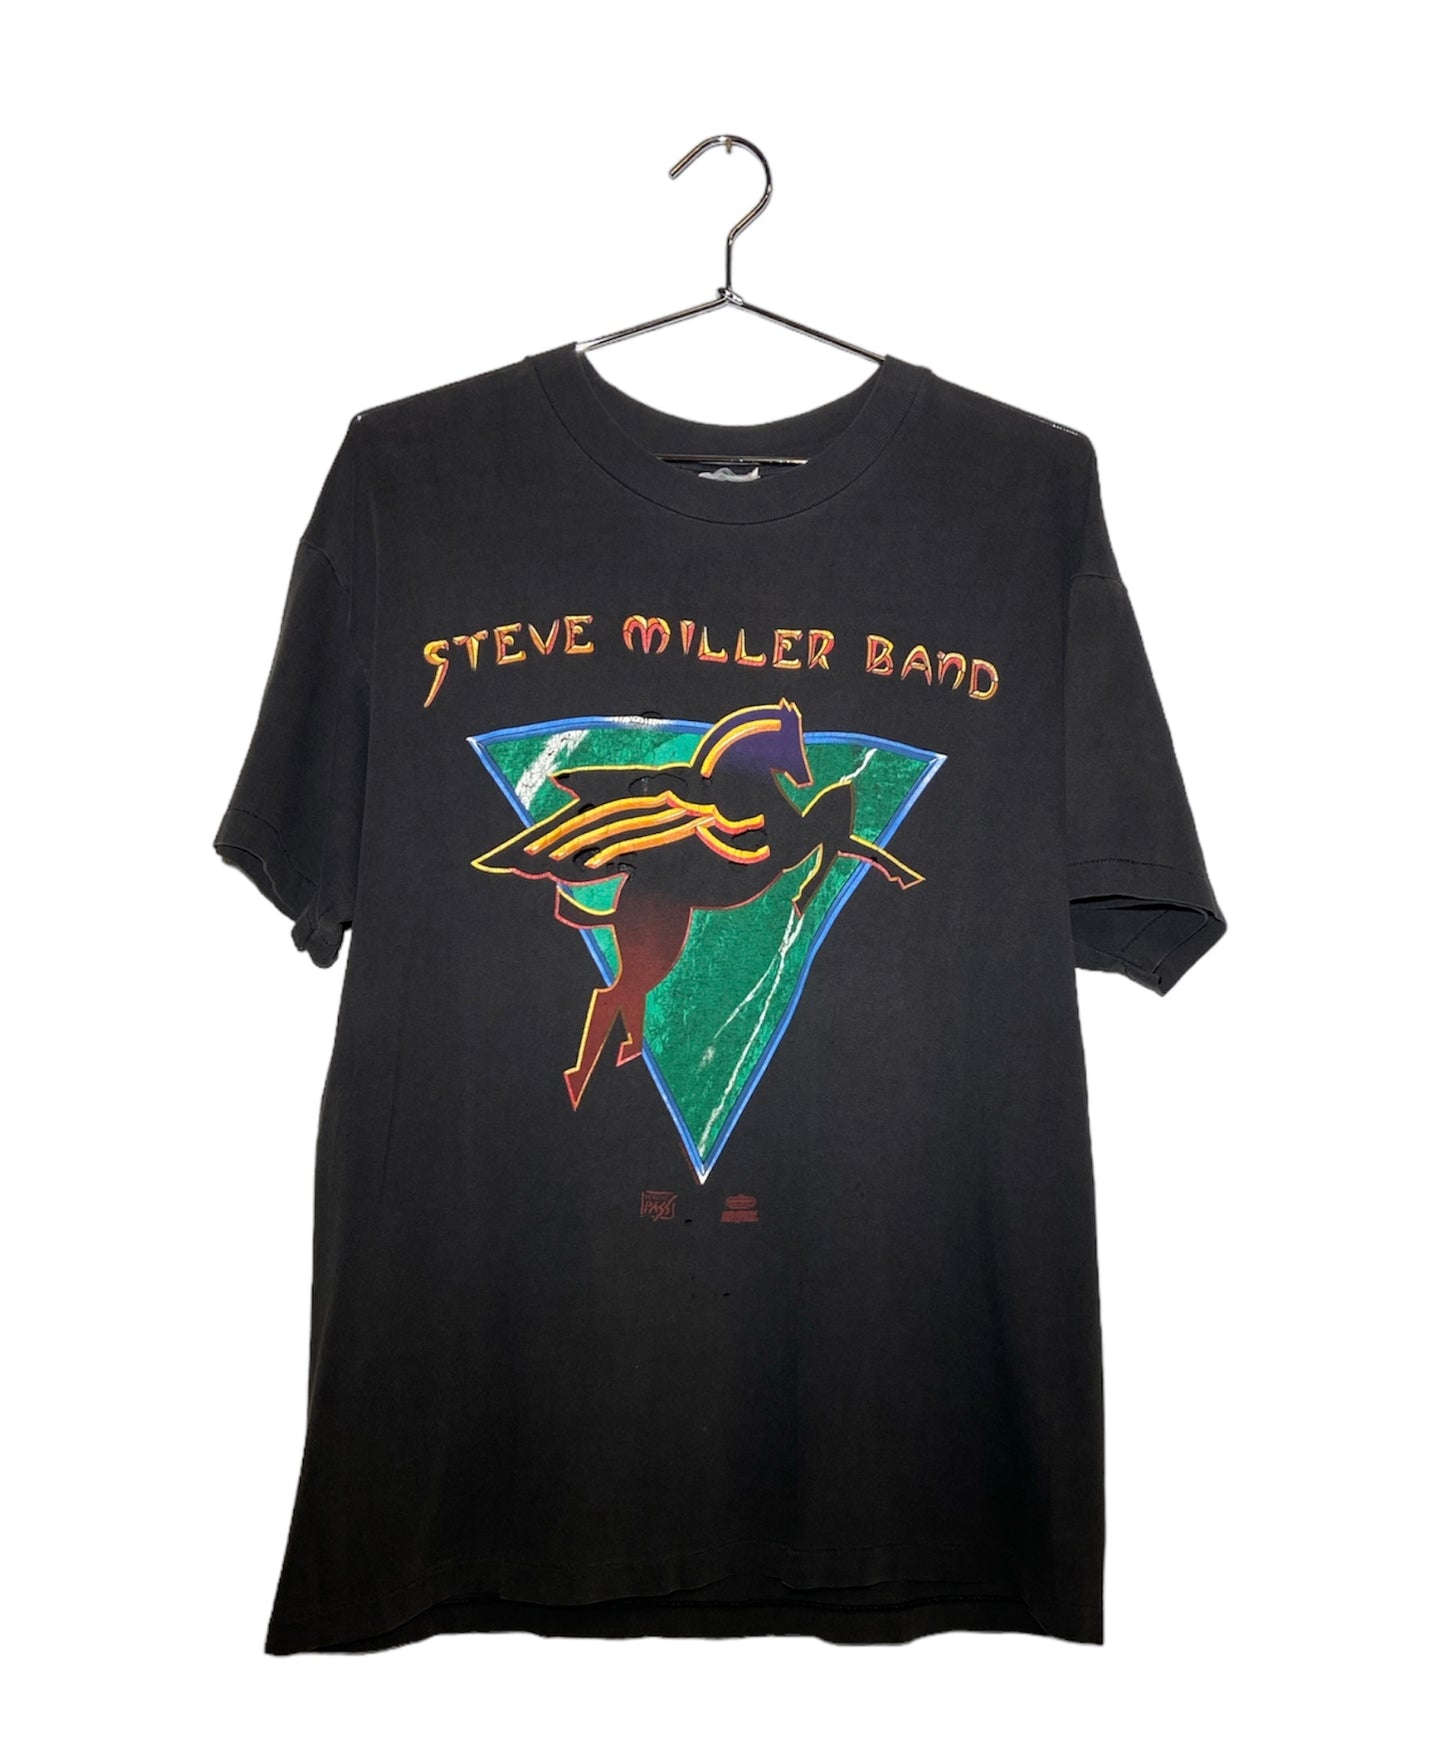 Steve Miller Band Lost Cities Tour 1992